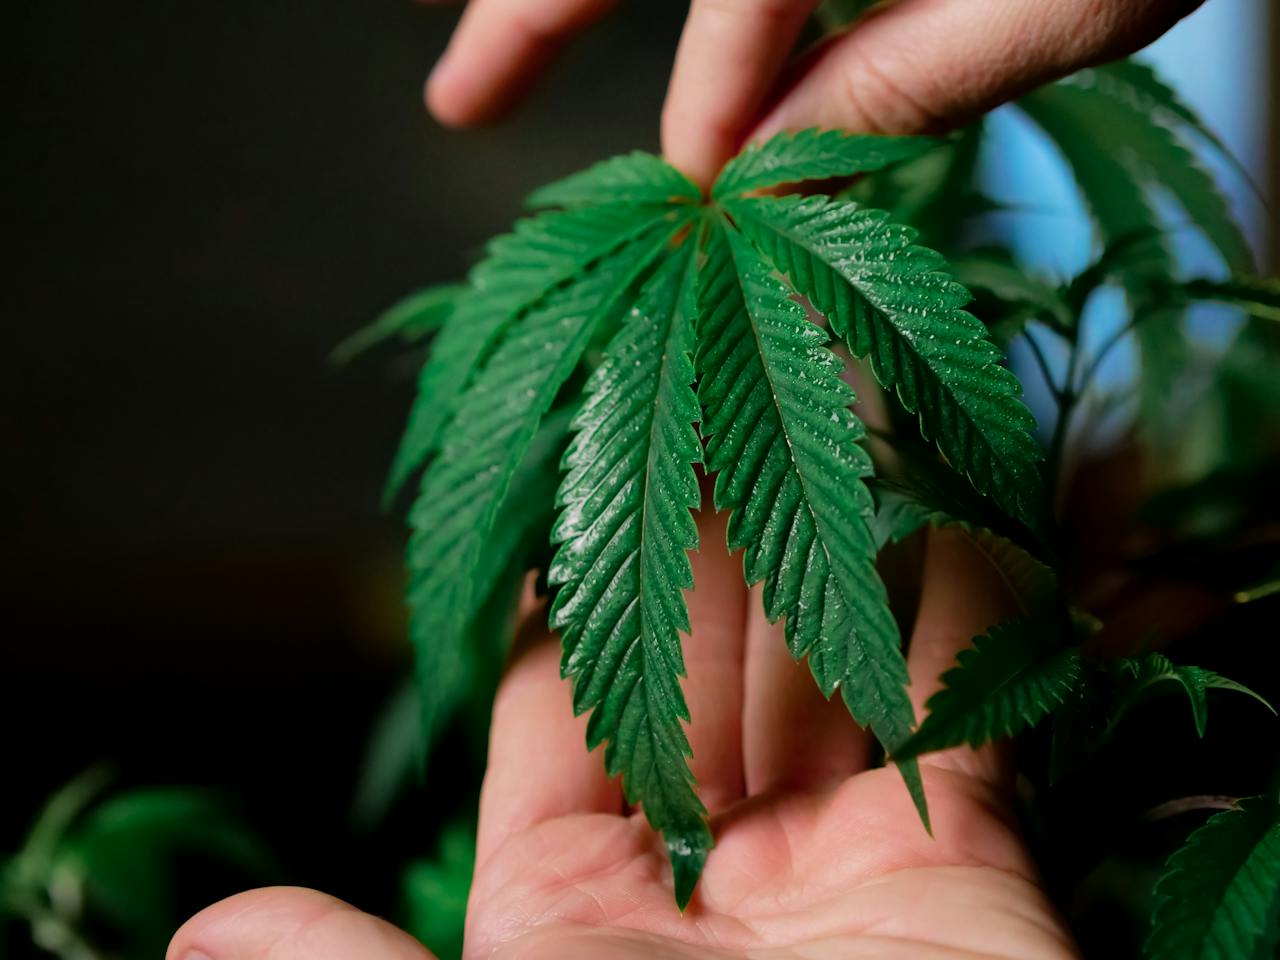  Person Holding Cannabis Plant